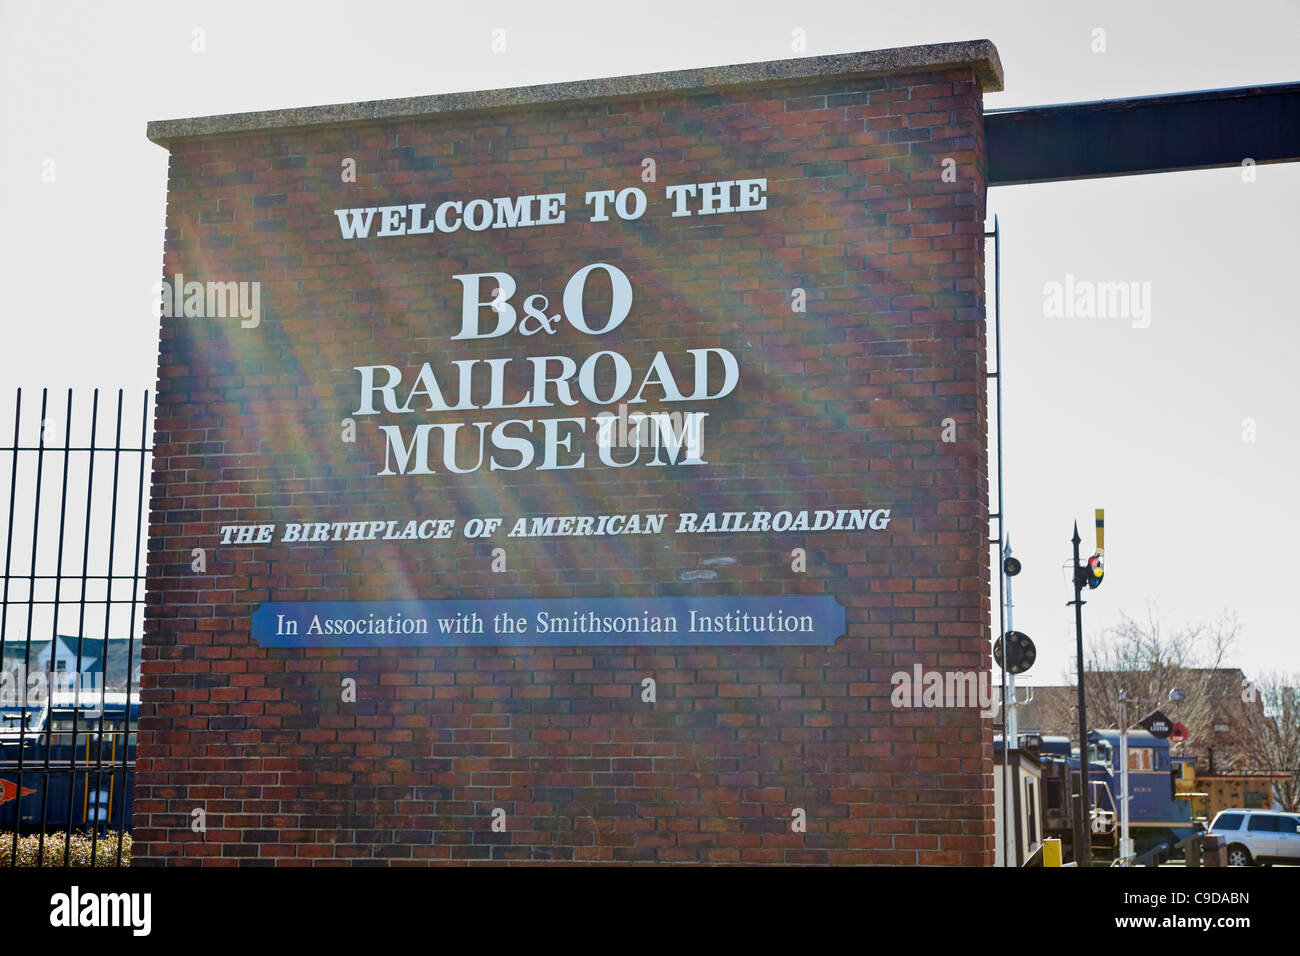 The entrance to and sign for the B&O Railroad Museum, Baltimore, Maryland. Stock Photo